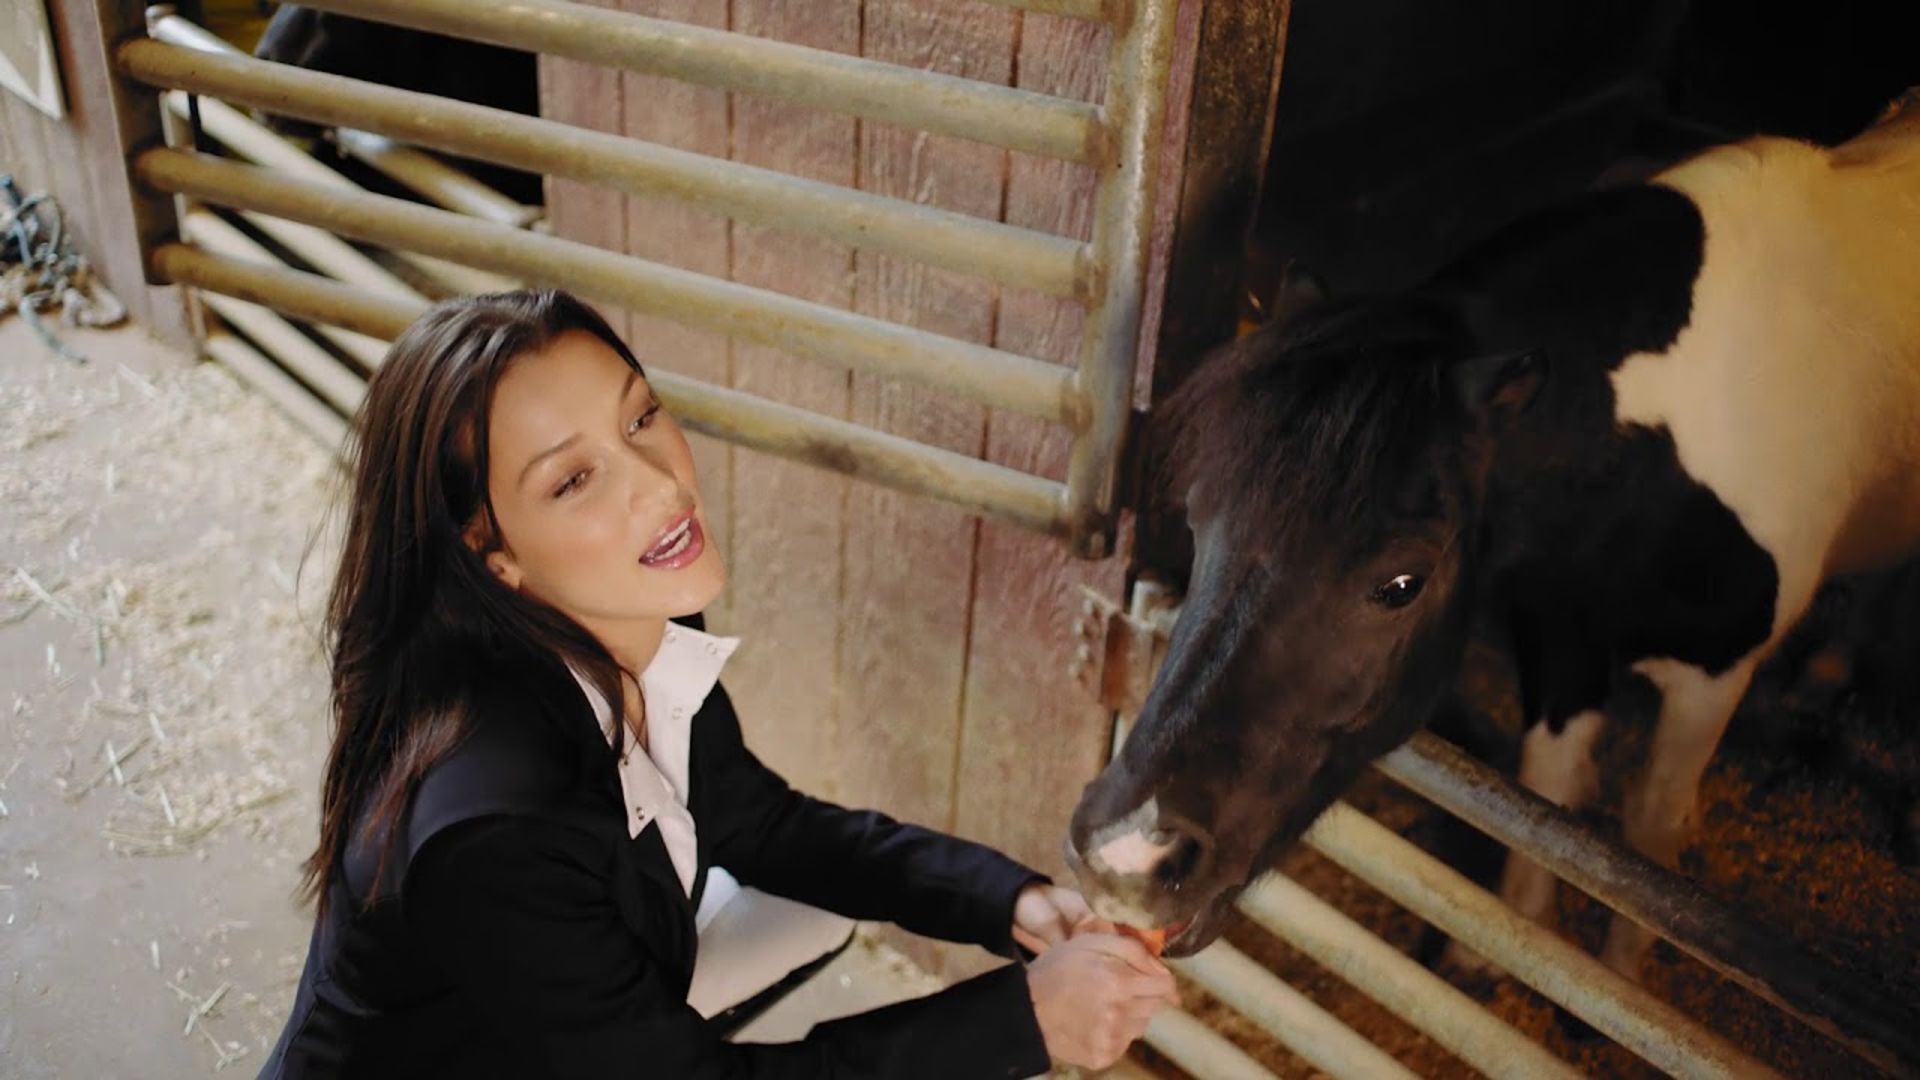 Bella Hadid Invents New Ways of Horseback Riding in Behind-the-Scenes Shoot  for 'Vogue